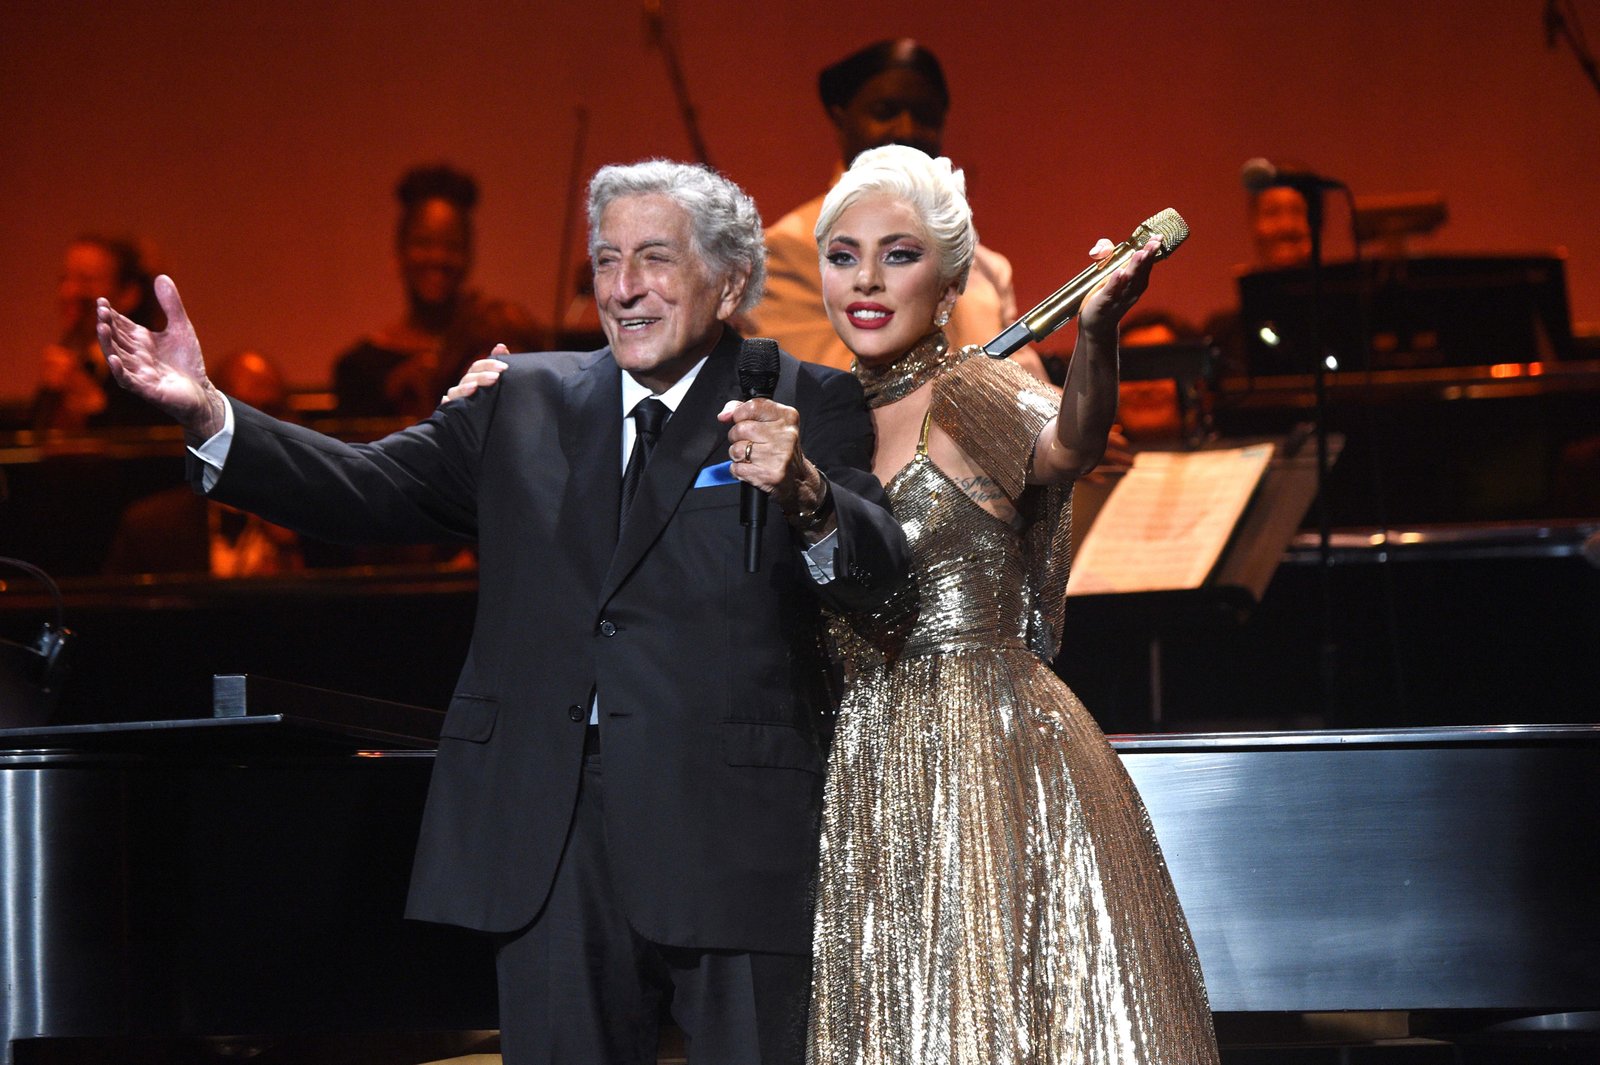 The unlikely duo released two albums together, 2014’s “Cheek to Cheek” and 2021’s “Love for Sale,” both of which were critically acclaimed and won Grammy Awards for Best Traditional Pop Vocal Album.